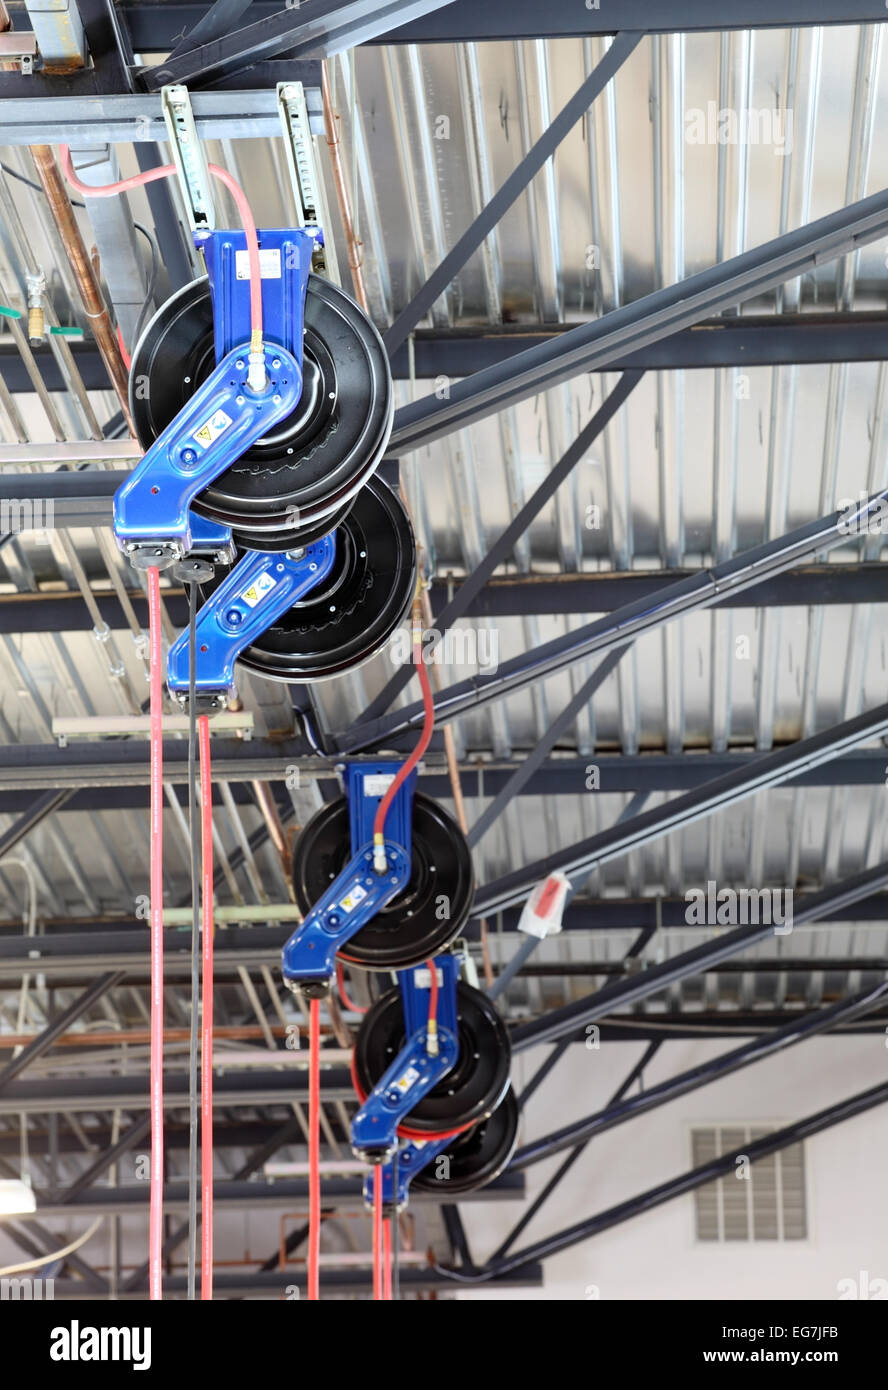 A row of hose reels hanging from the ceiling of an automotive repair shop Stock Photo